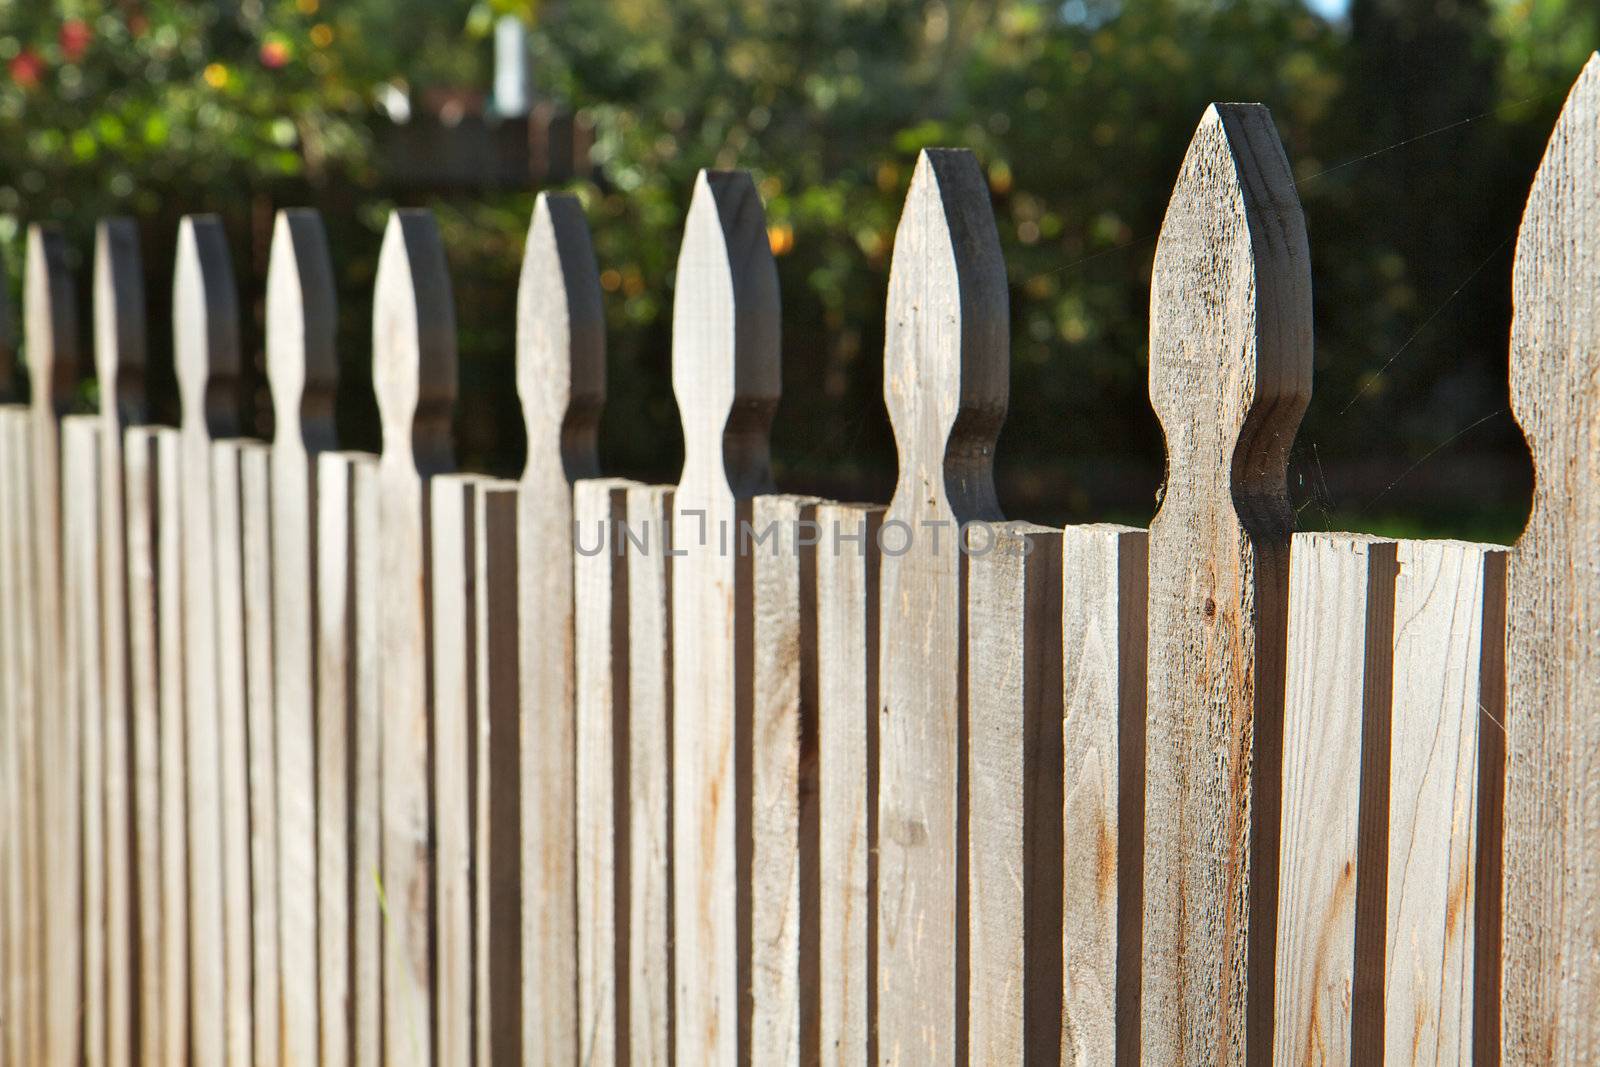 Plain carved wood fence win perspectie dimishing to soft focus